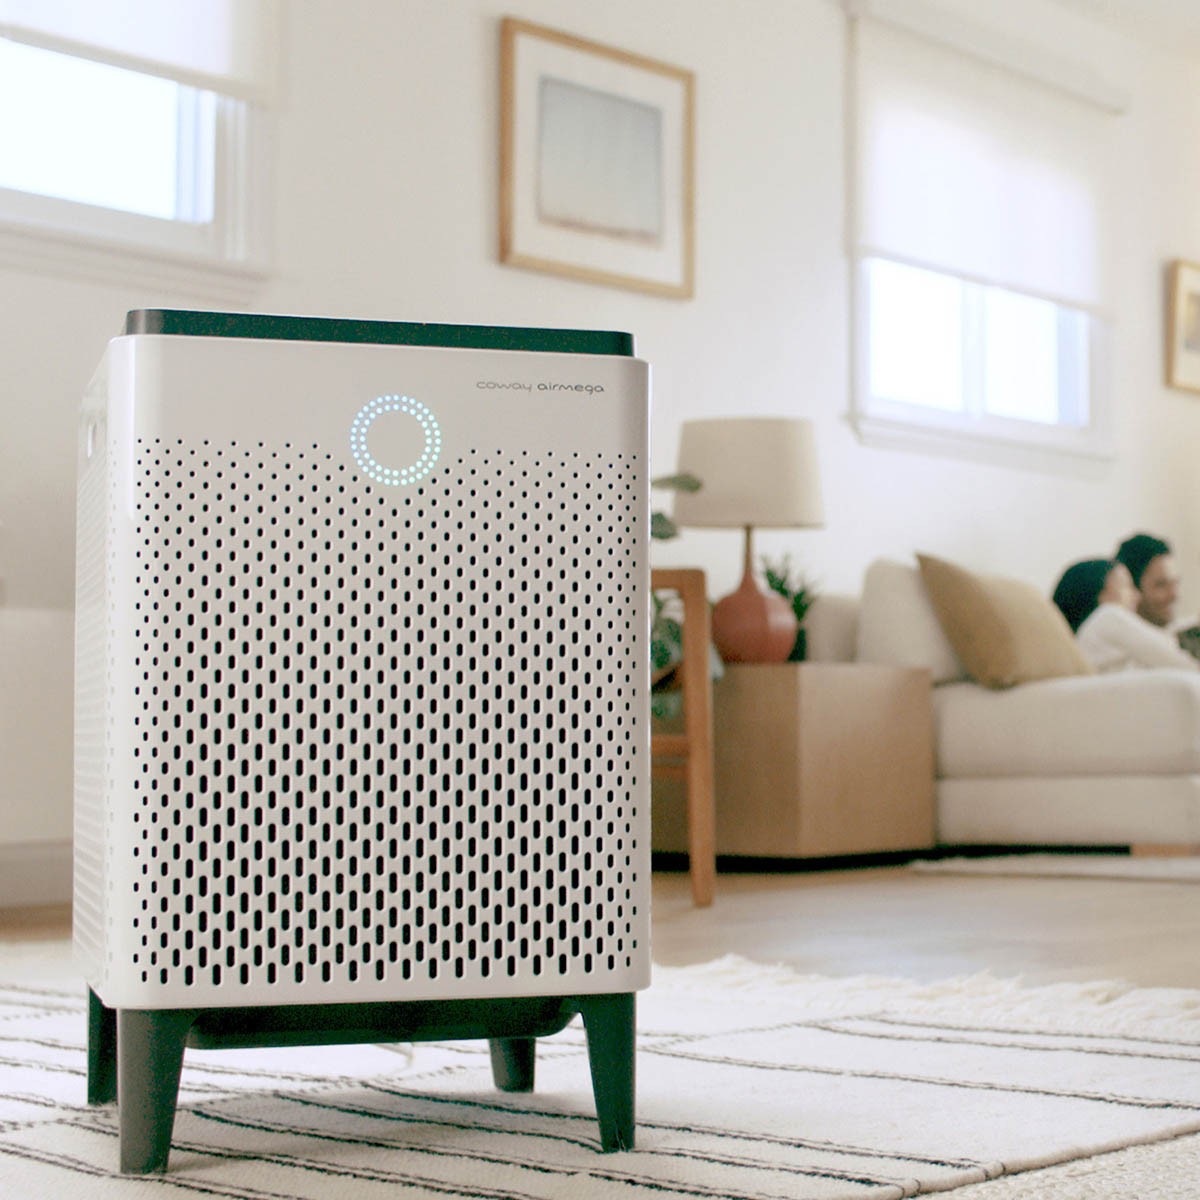 https://s3-assets.sylvane.com/media/images/products/coway-airmega-400s-air-purifier-alexa-lifestyle-2.jpg